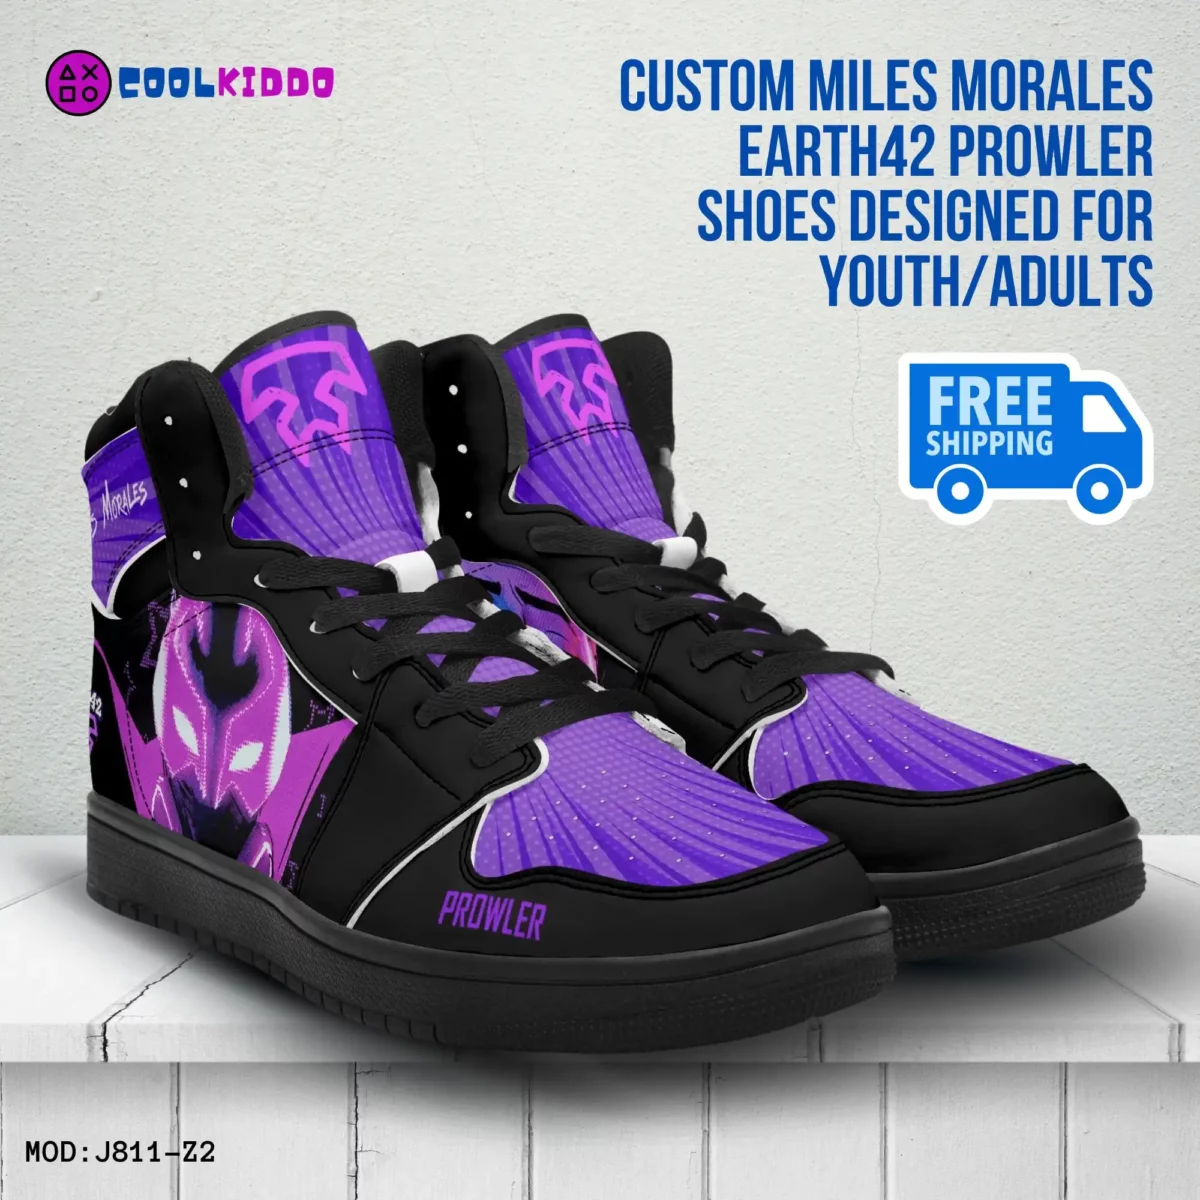 Custom Miles Morales Spiderman Shoes Spider Verse Earth 42 Prowler High-Top Leather Sneakers Cool Kiddo 10